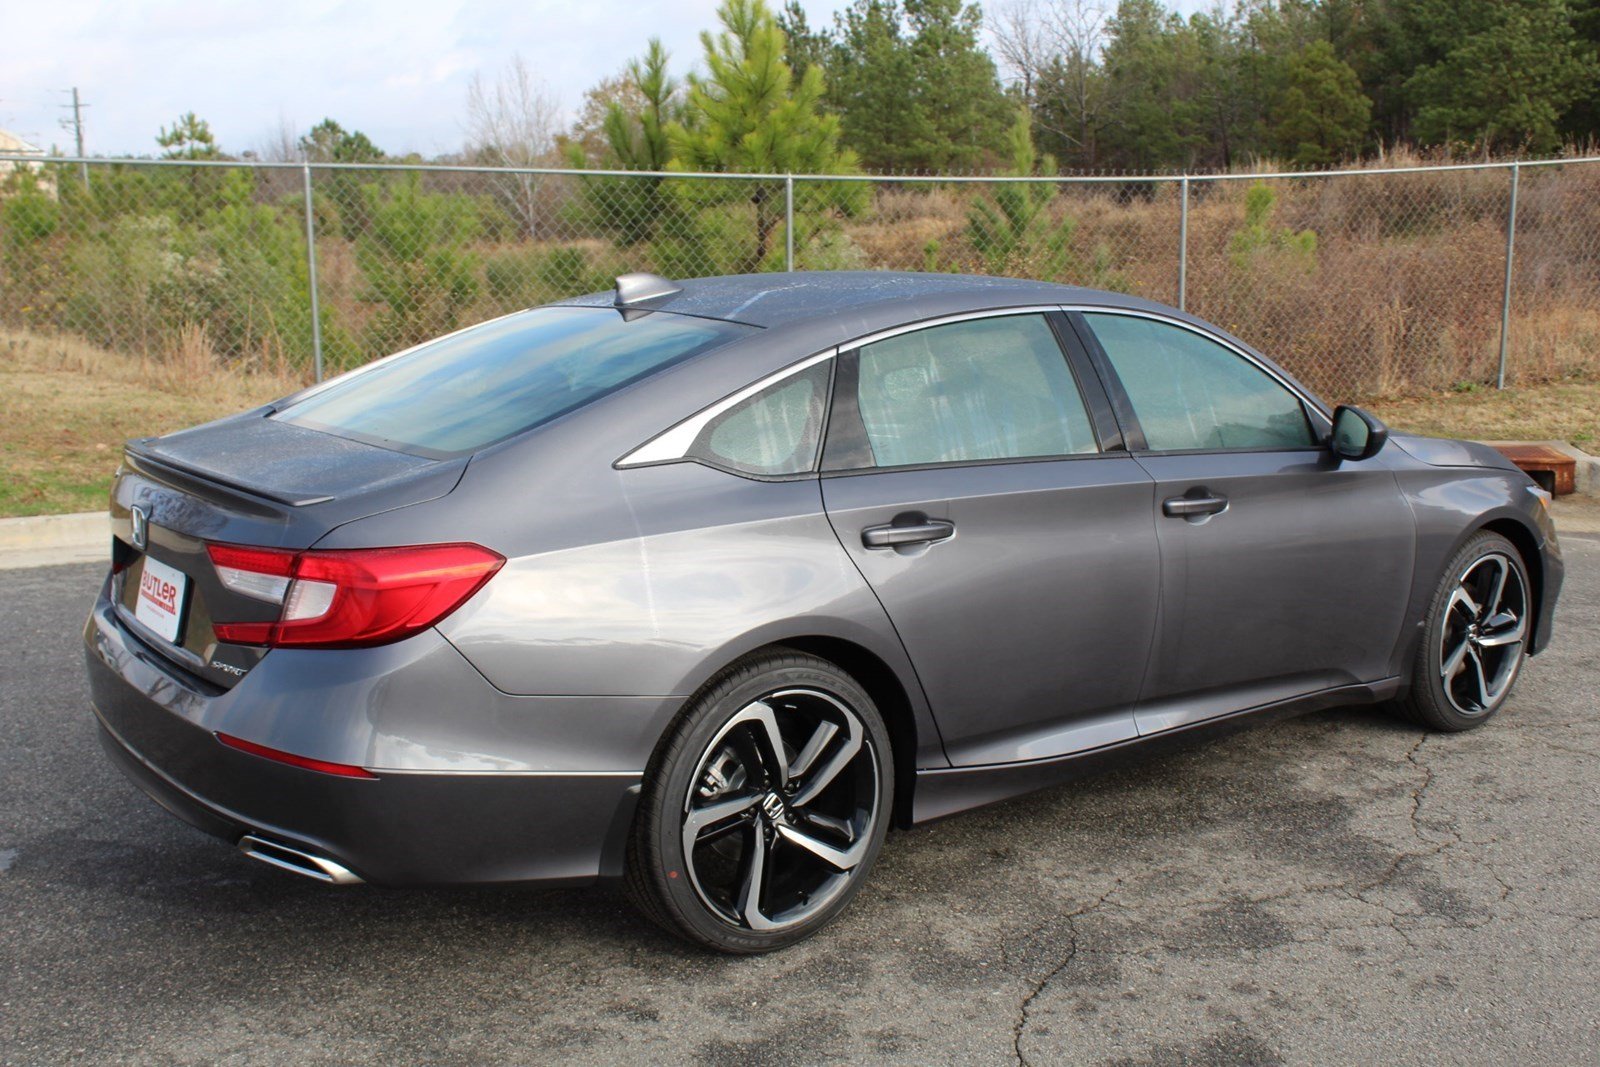 New 2020 Honda Accord Sport 1.5T 4dr Car in Milledgeville